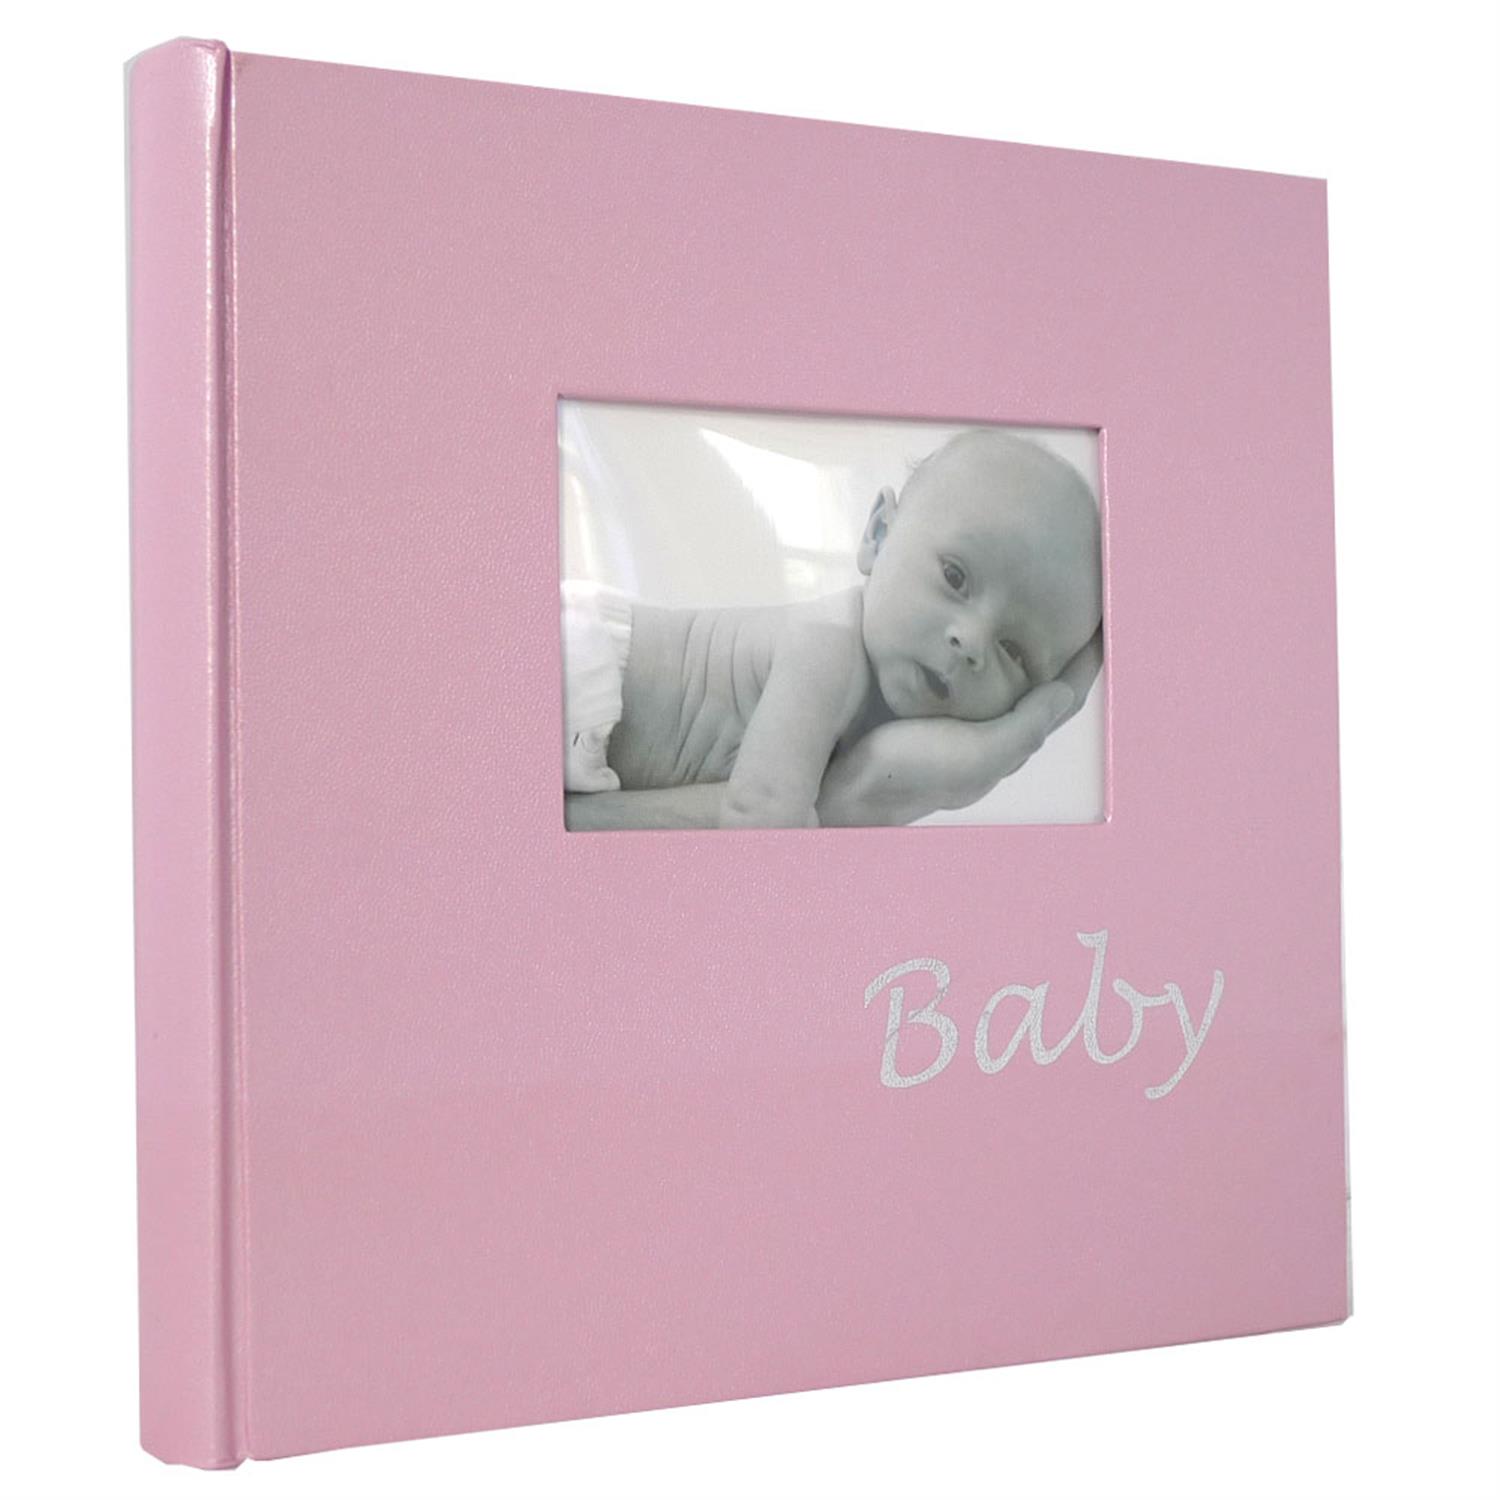 Dorr Baby Pink Traditional Photo Album - 60 Sides